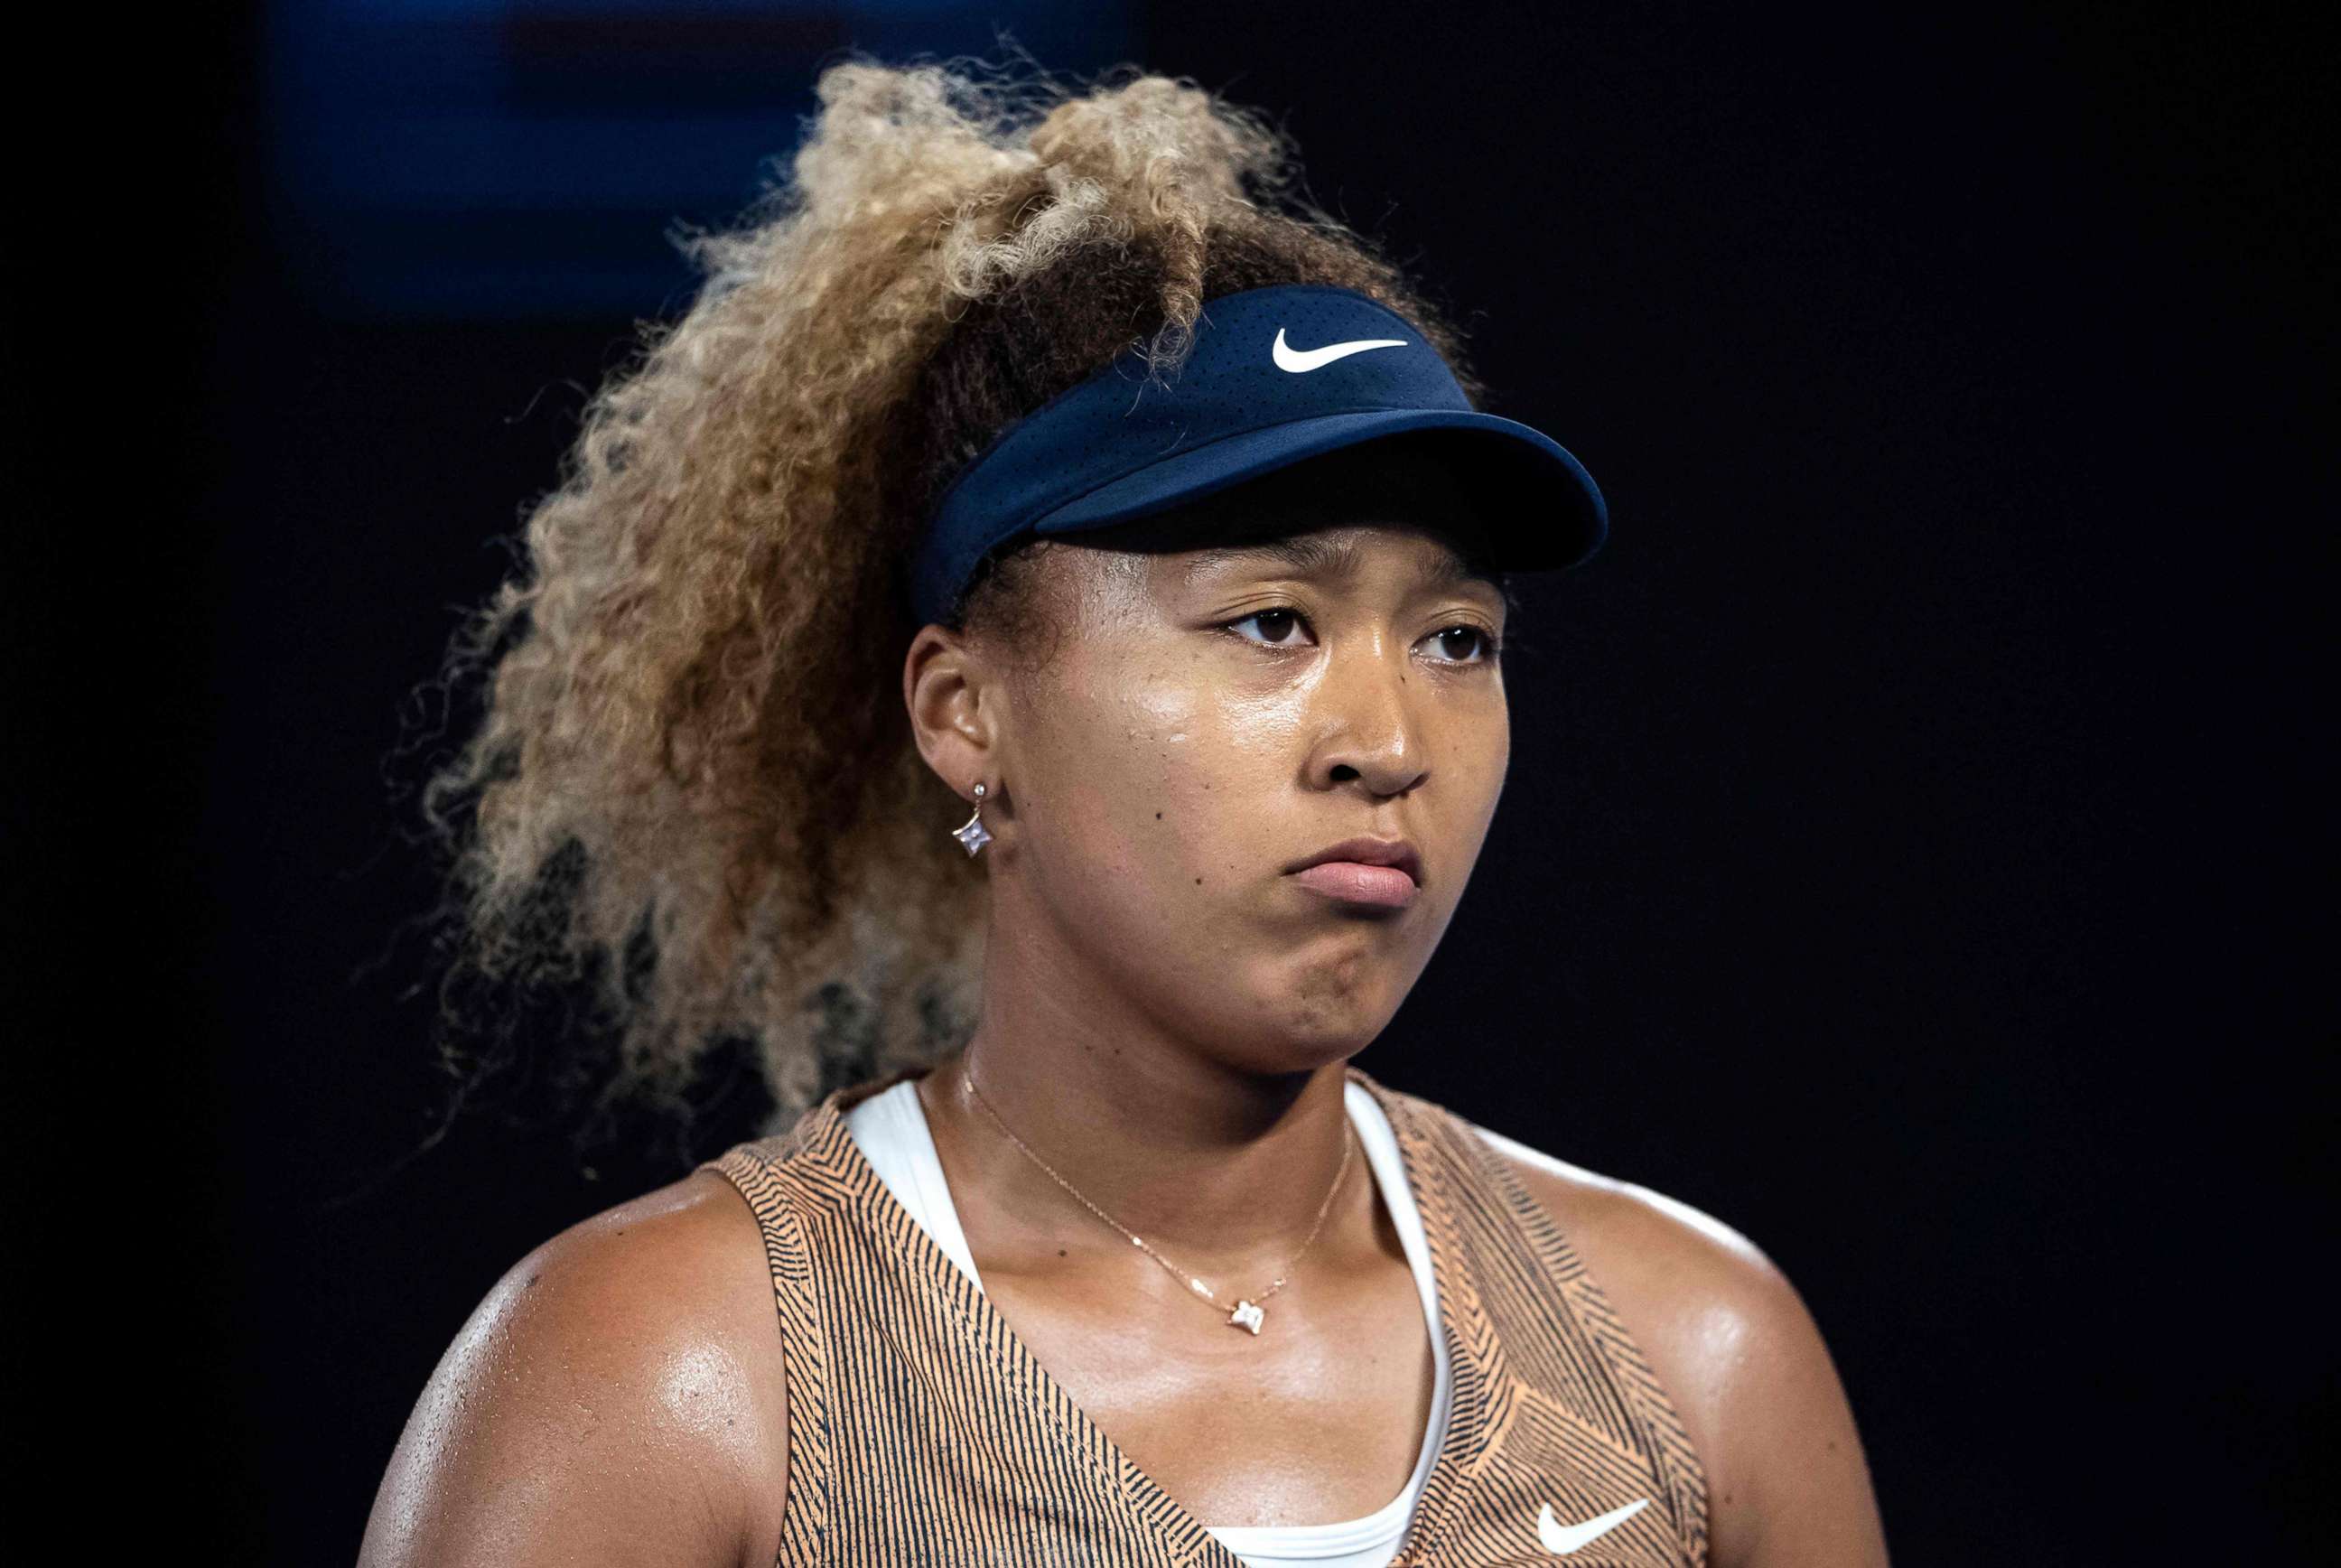 PHOTO: Naomi Osaka of Japan reacts on a point during her women's singles match against Andrea Petkovic of Germany at the Melbourne Summer Set tennis tournament in Australia, Jan. 7, 2022.